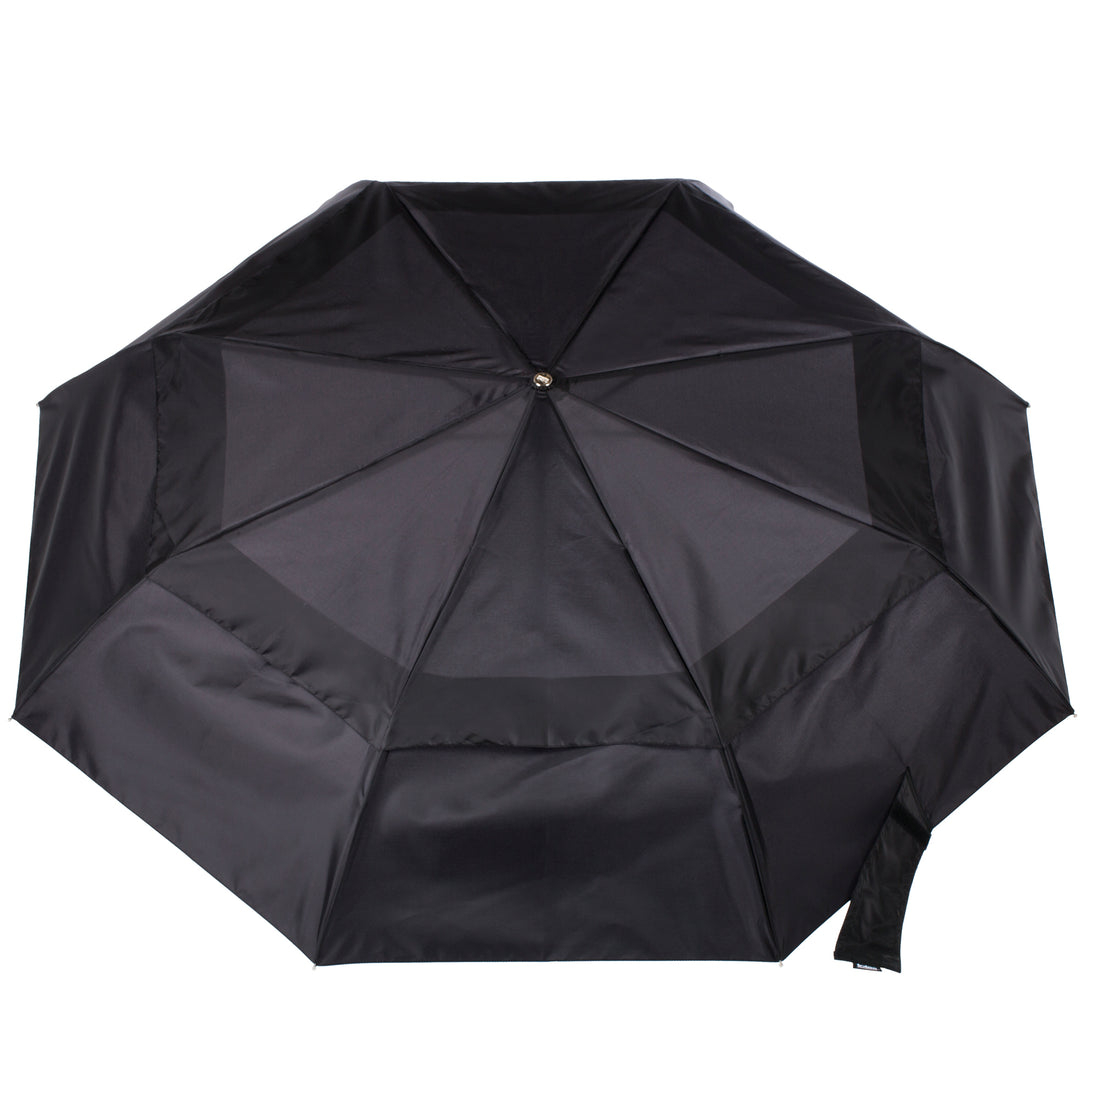 Extra-Large Recycled Vented Canopy Folding Umbrella with Auto Open/Close and Sunguard® Technology